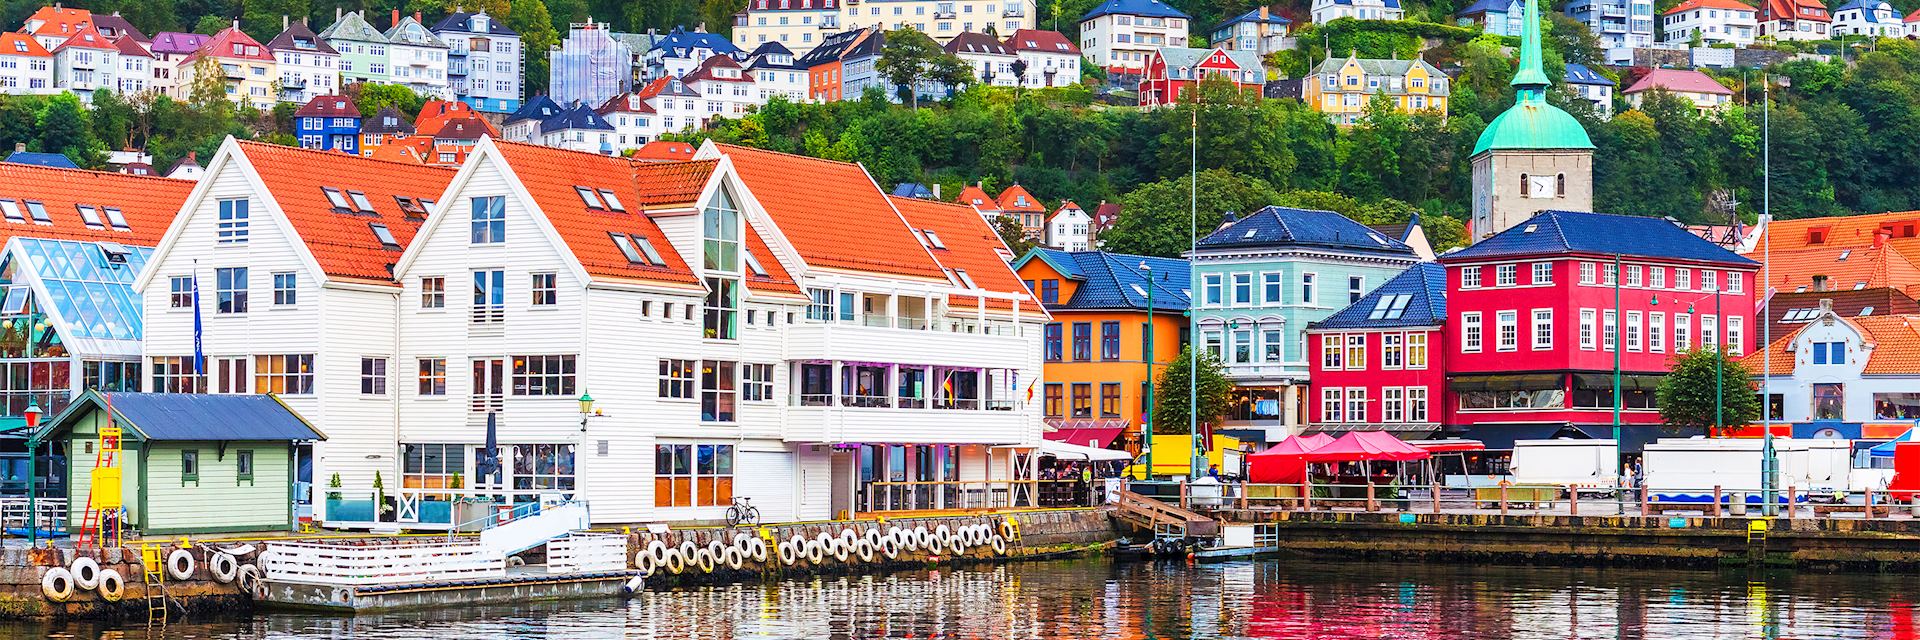 Visit Bergen on a trip to Norway | Audley Travel